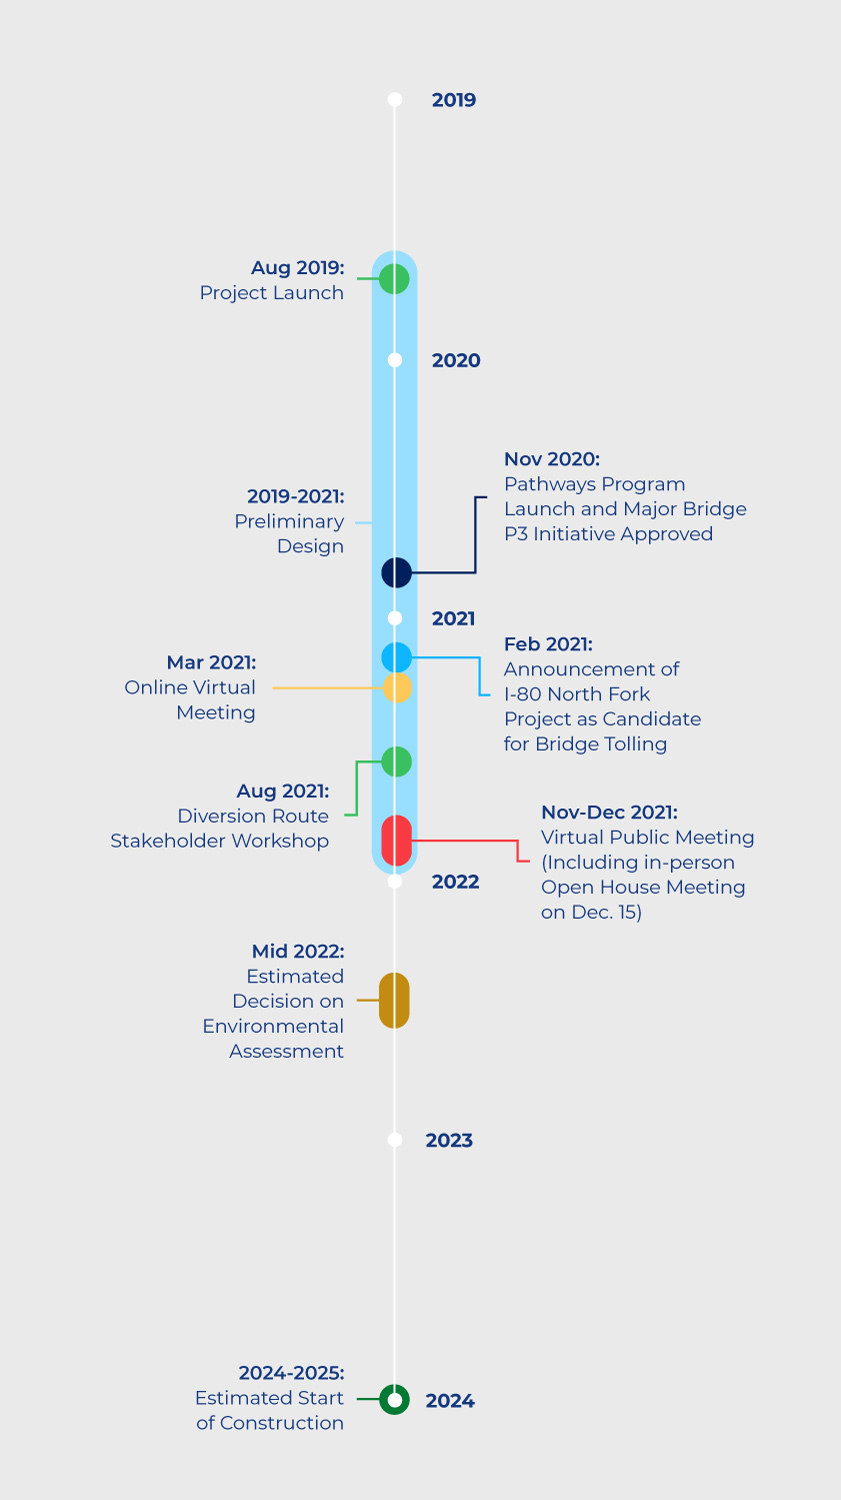 Timeline: Project launch in August 2019. Preliminary design in 2019-2021. Pathways Program launches and Major Bridge P3 initiative approved in November 2020. Announcement of I-80 North Fork Project as candidate for bridge tolling in Feburary 2021. Online virtual meeting in March 2021. Diversion route stakeholder workshop in August 2021. Virtual public meeting (including in-person open huse meeting on Dec. 15) in November-December 2021. Estimated decision on Environmental Assessment in mid-2022. Estimated start of construction in 2024-2025.